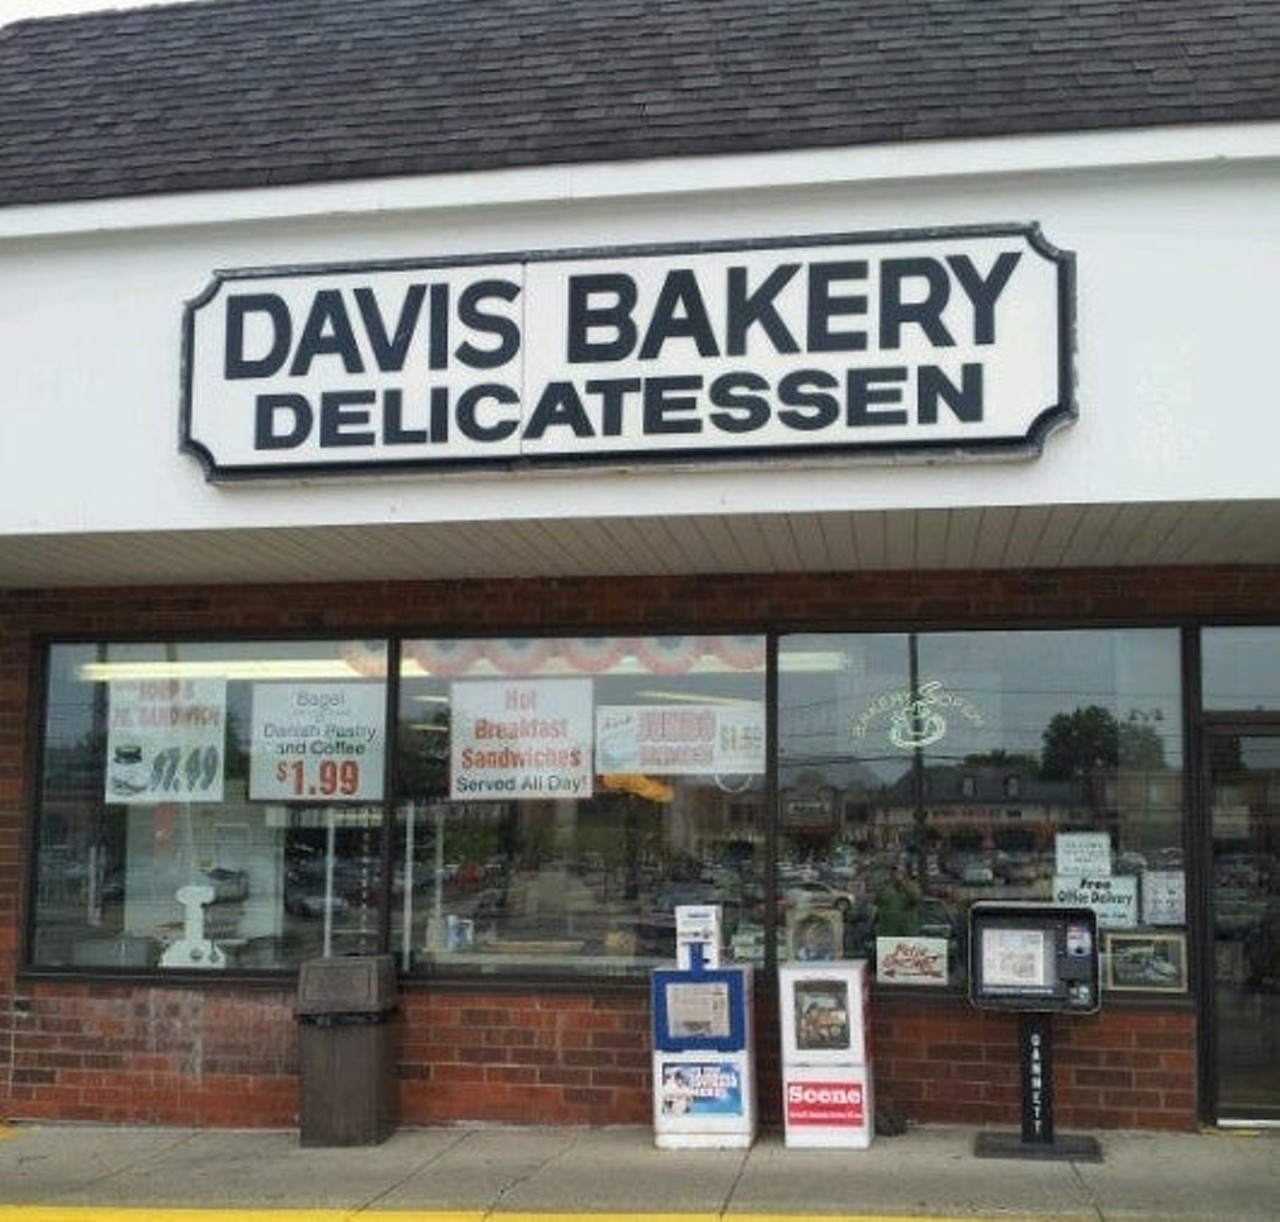  Davis Bakery and Deli
Multiple Locations 
With Wax and Mandel and Pincus bakeries closing in recent years, Davis Bakery is one of the only Jewish bakeries left in town. For baked goods, Davis, which opened in 1939, is known for their coconut bars, their russian tea biscuits and their chocolate chip cookies. But their hot food, like their corned beef, is as good as it gets.
Photo via Davis Bakery/Facebook